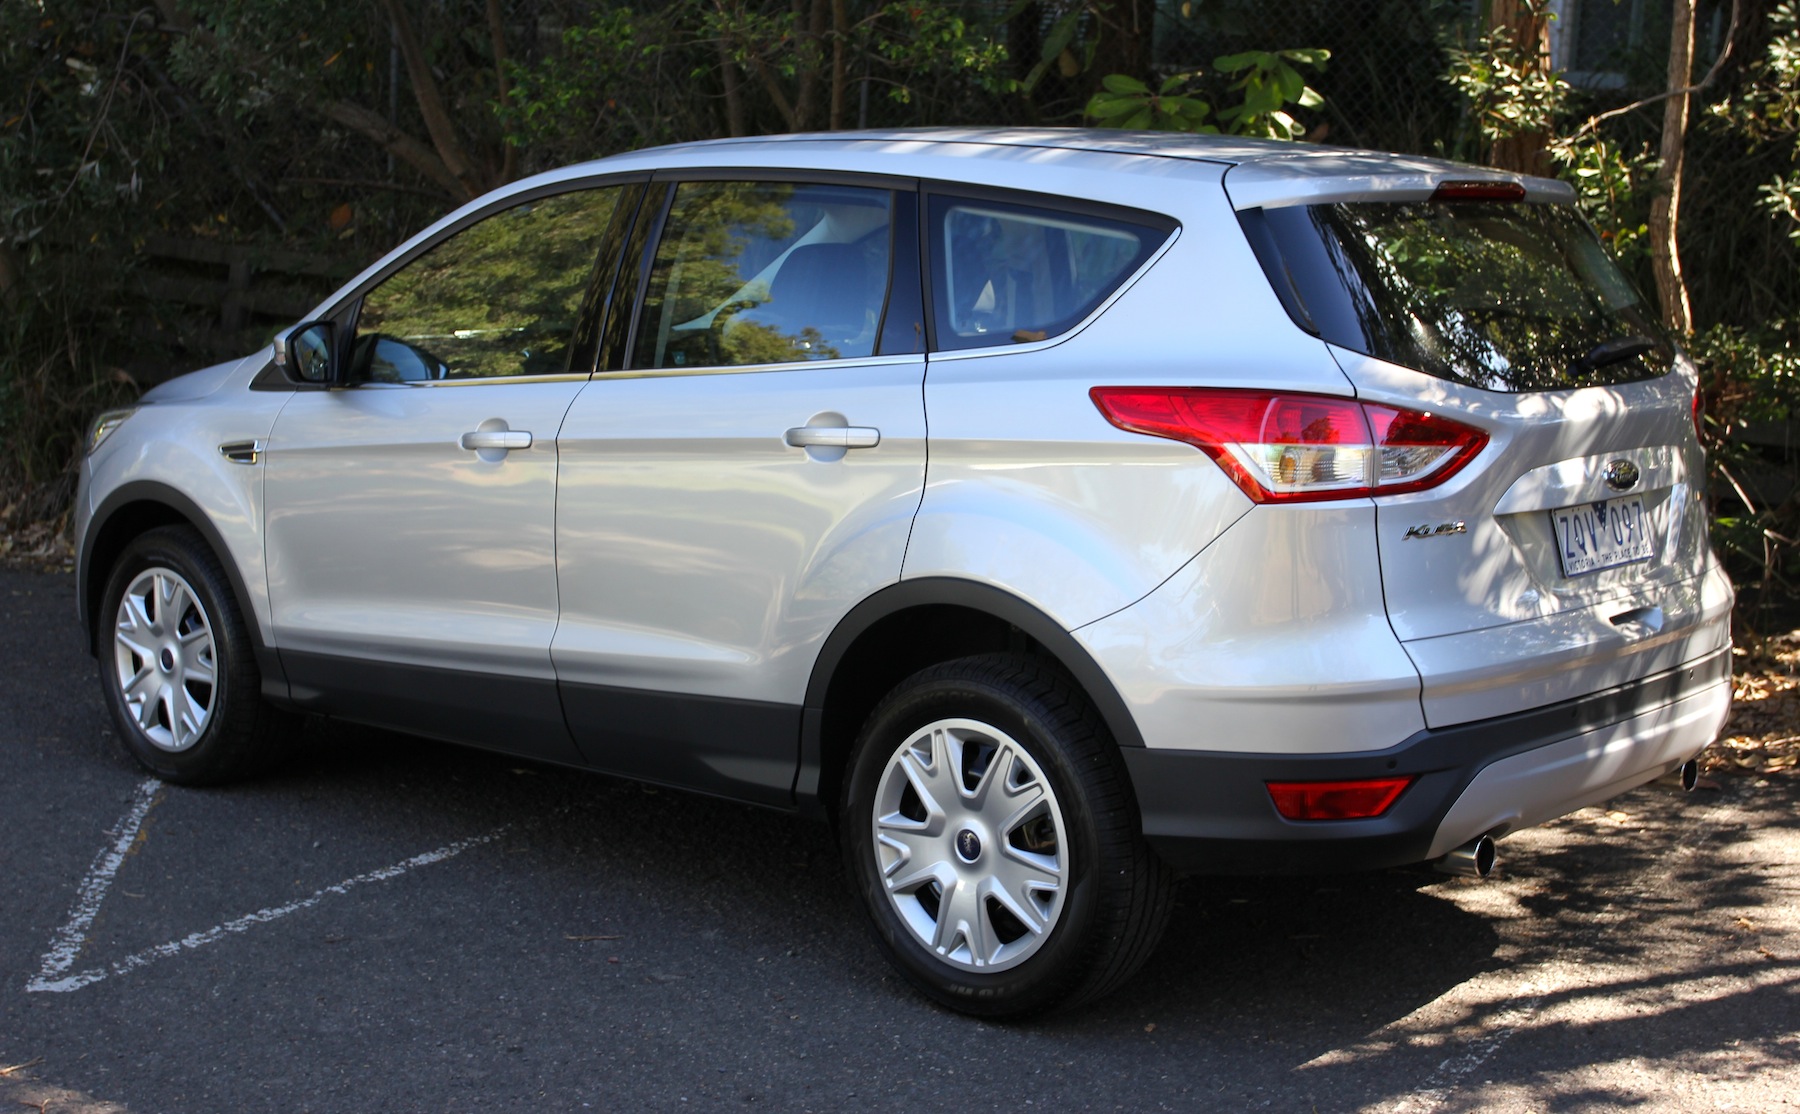 Ford Kuga Review: Ambiente - photos | CarAdvice